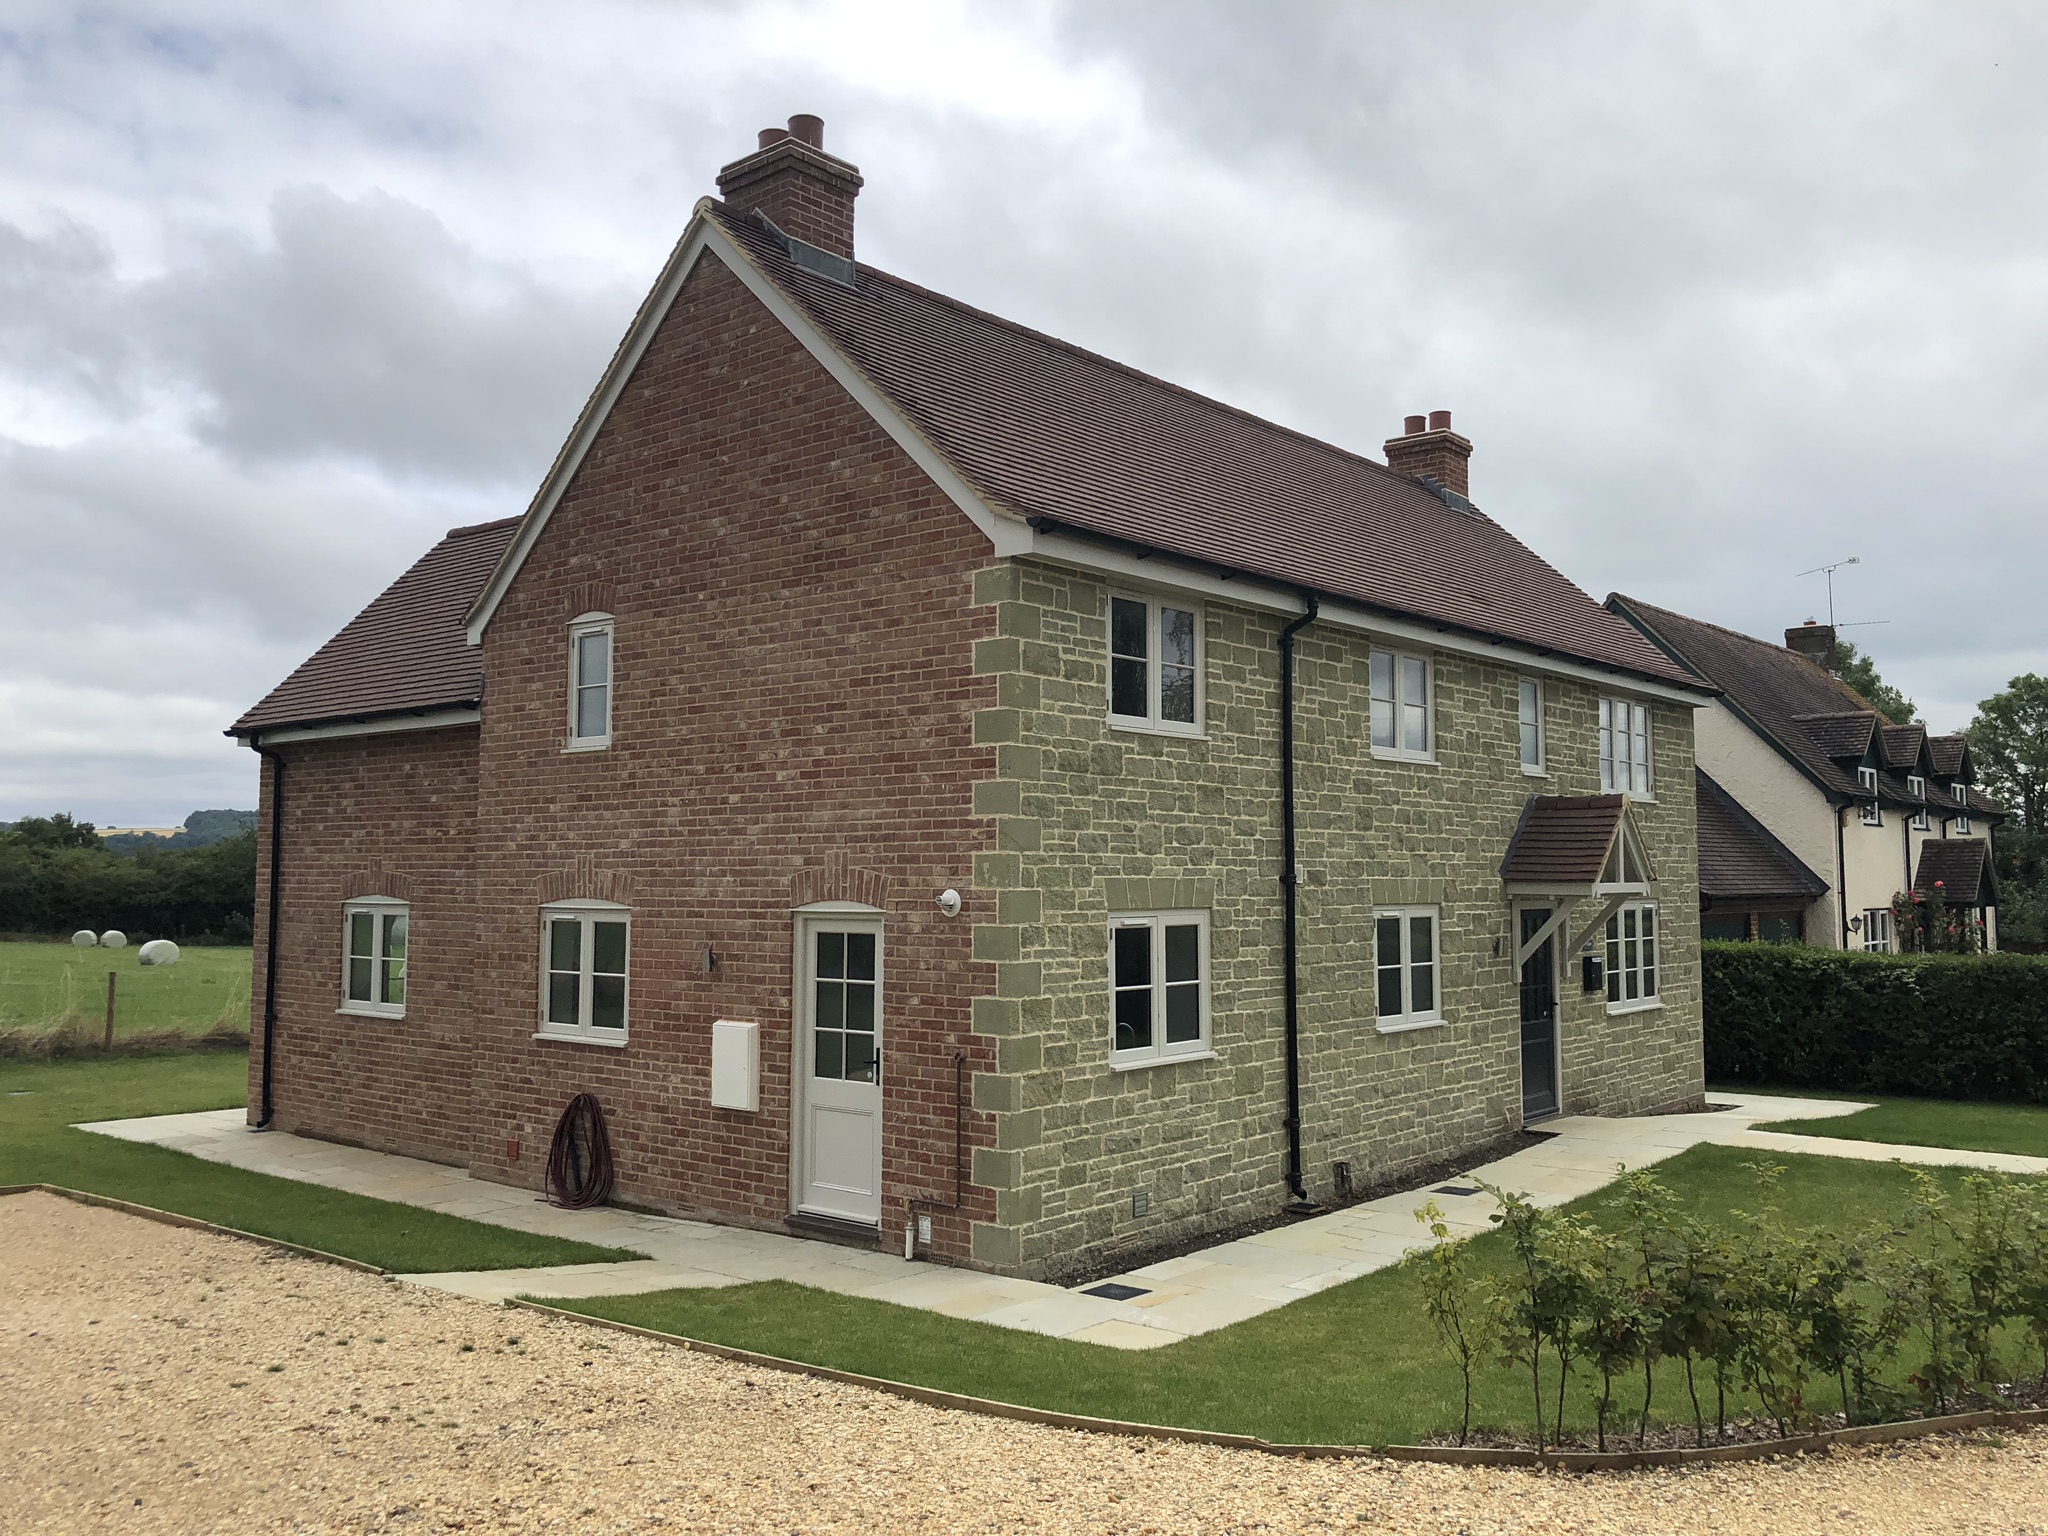 Pair of New Houses, East Knoyle, Wiltshire